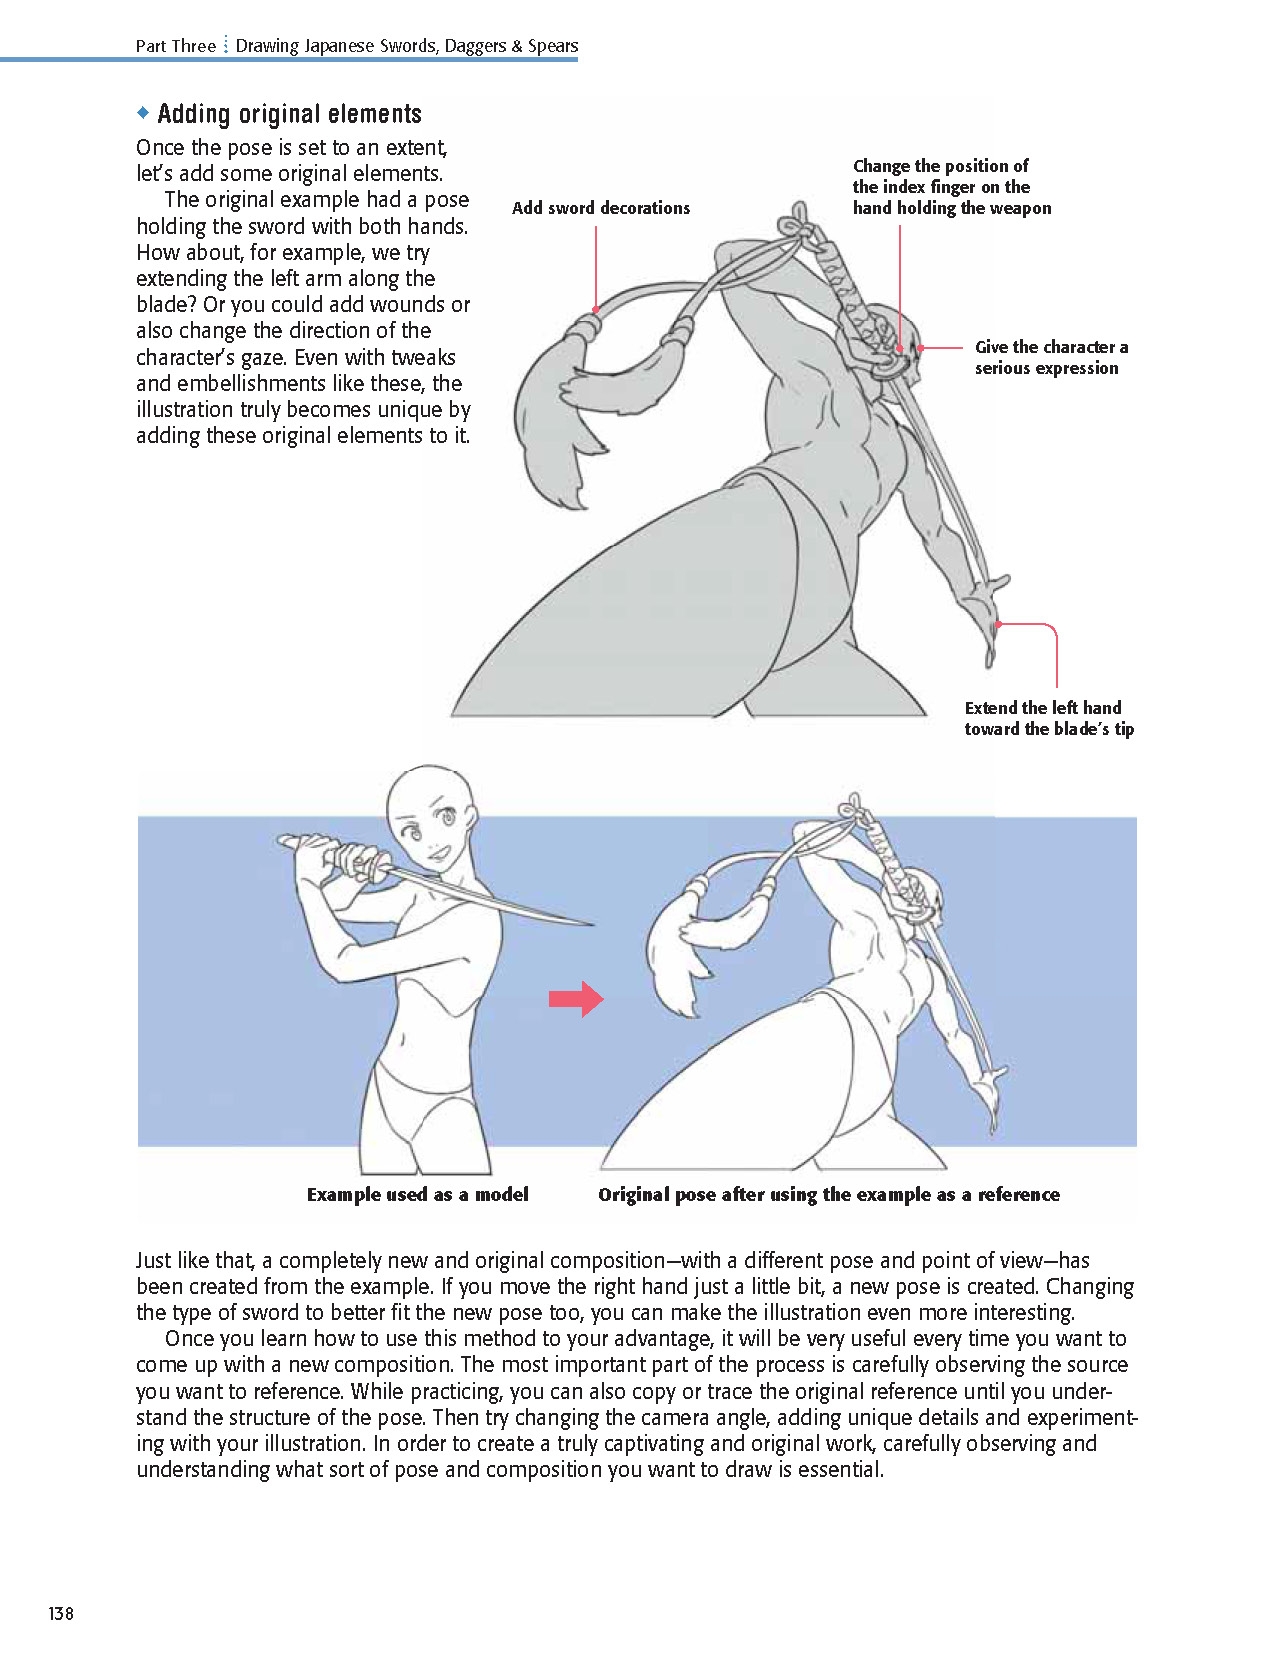 The Complete Guide to Drawing Dynamic Manga Sword Fighters: (An Action-Packed Guide with Over 600 illustrations) 139